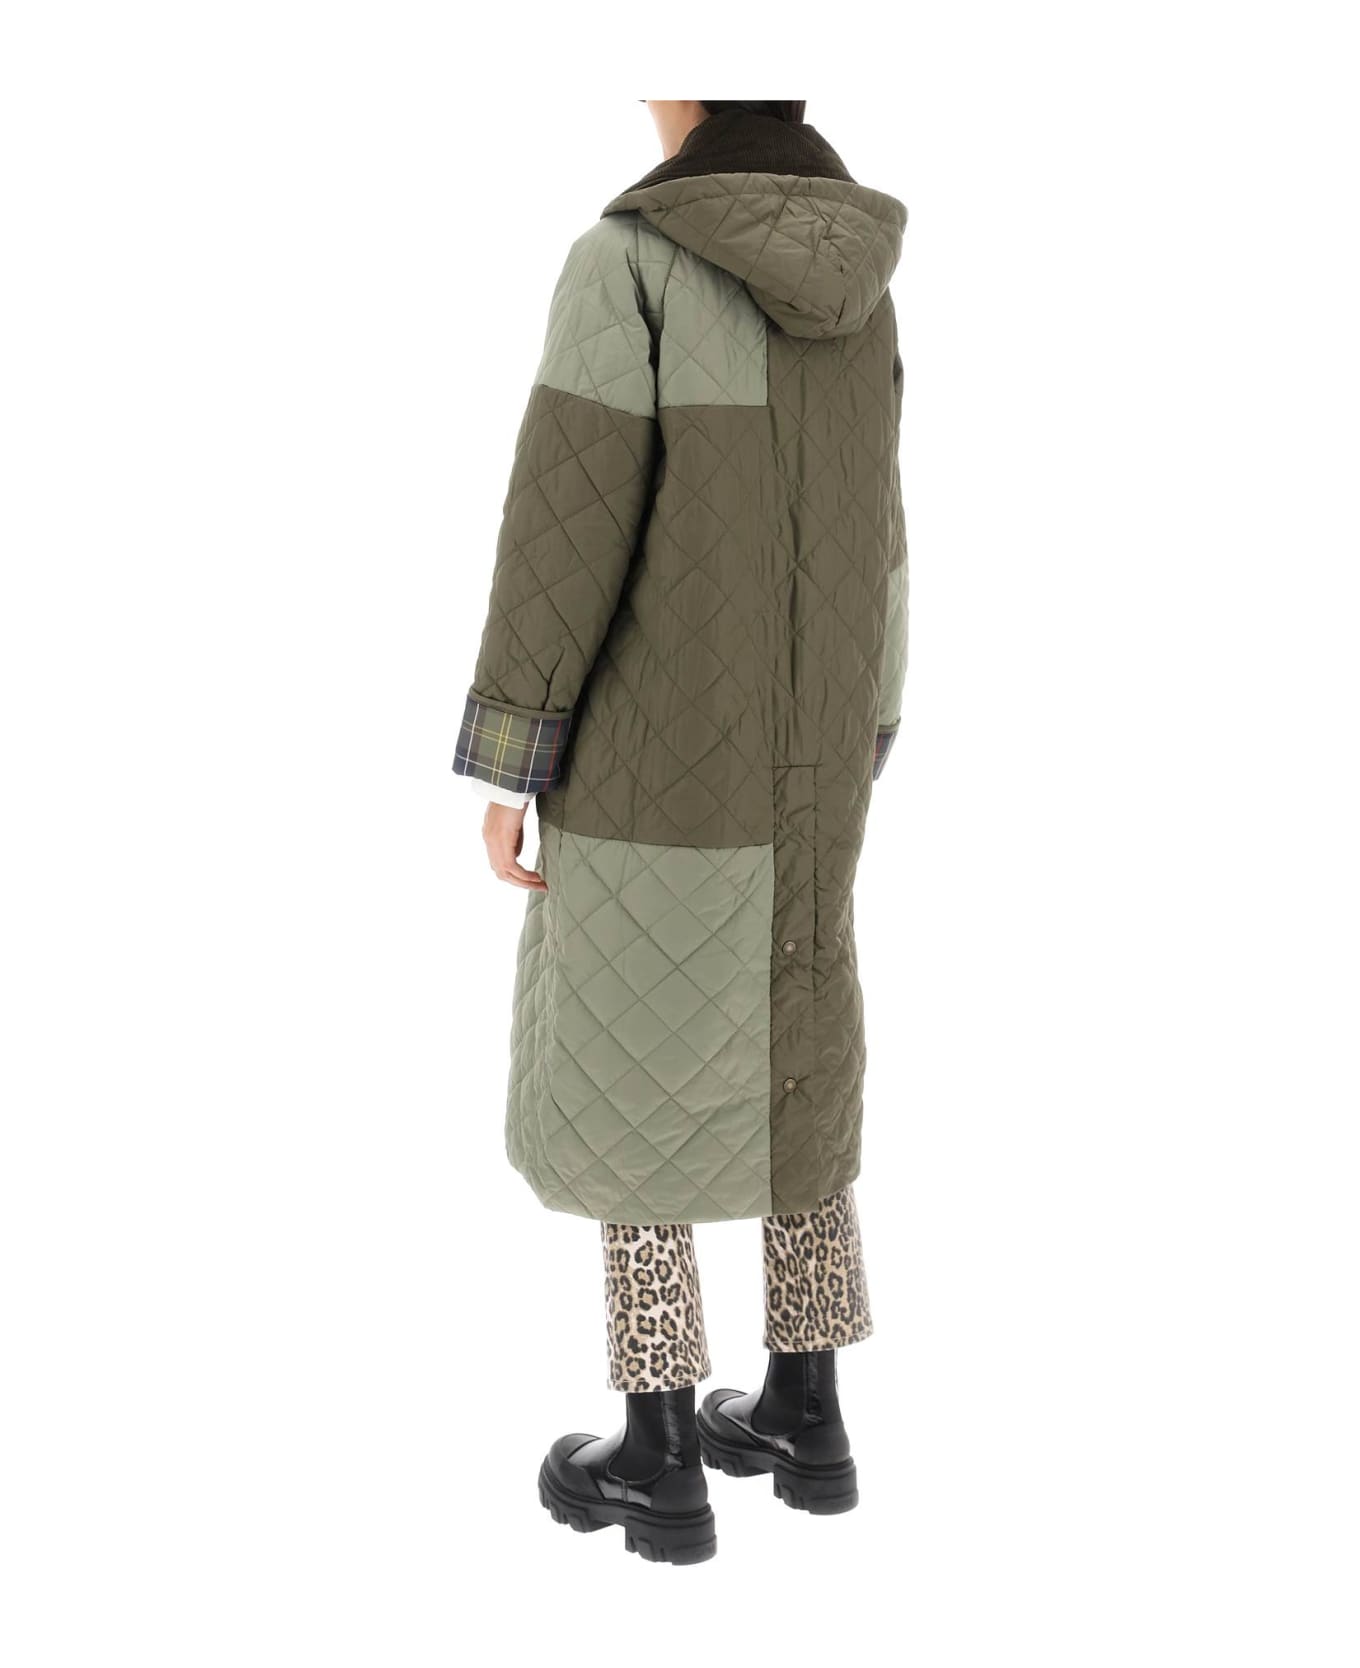 Barbour 'quilted Burghley' Long Down Jacket - FERN LT MOSS CLASSIC (Green) ジャケット